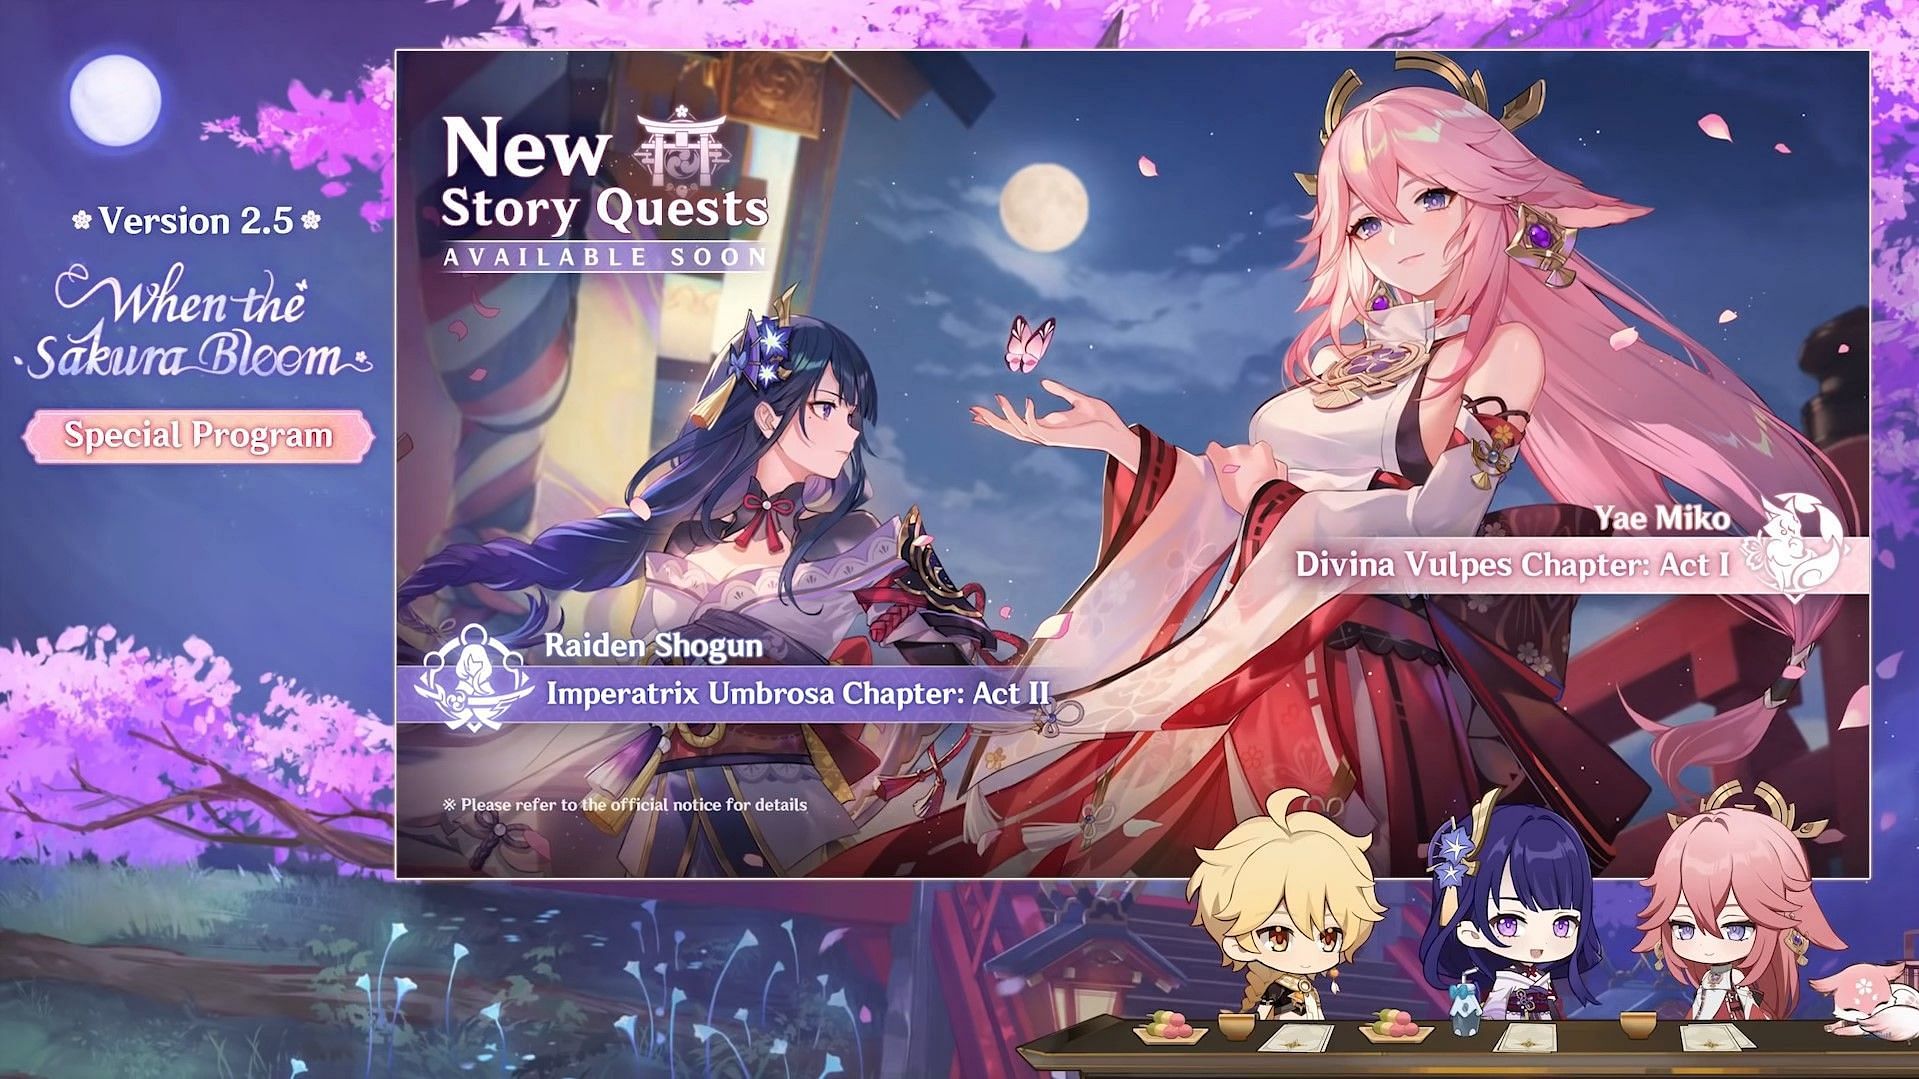 The upcoming Story Quests (Image via miHoYo)